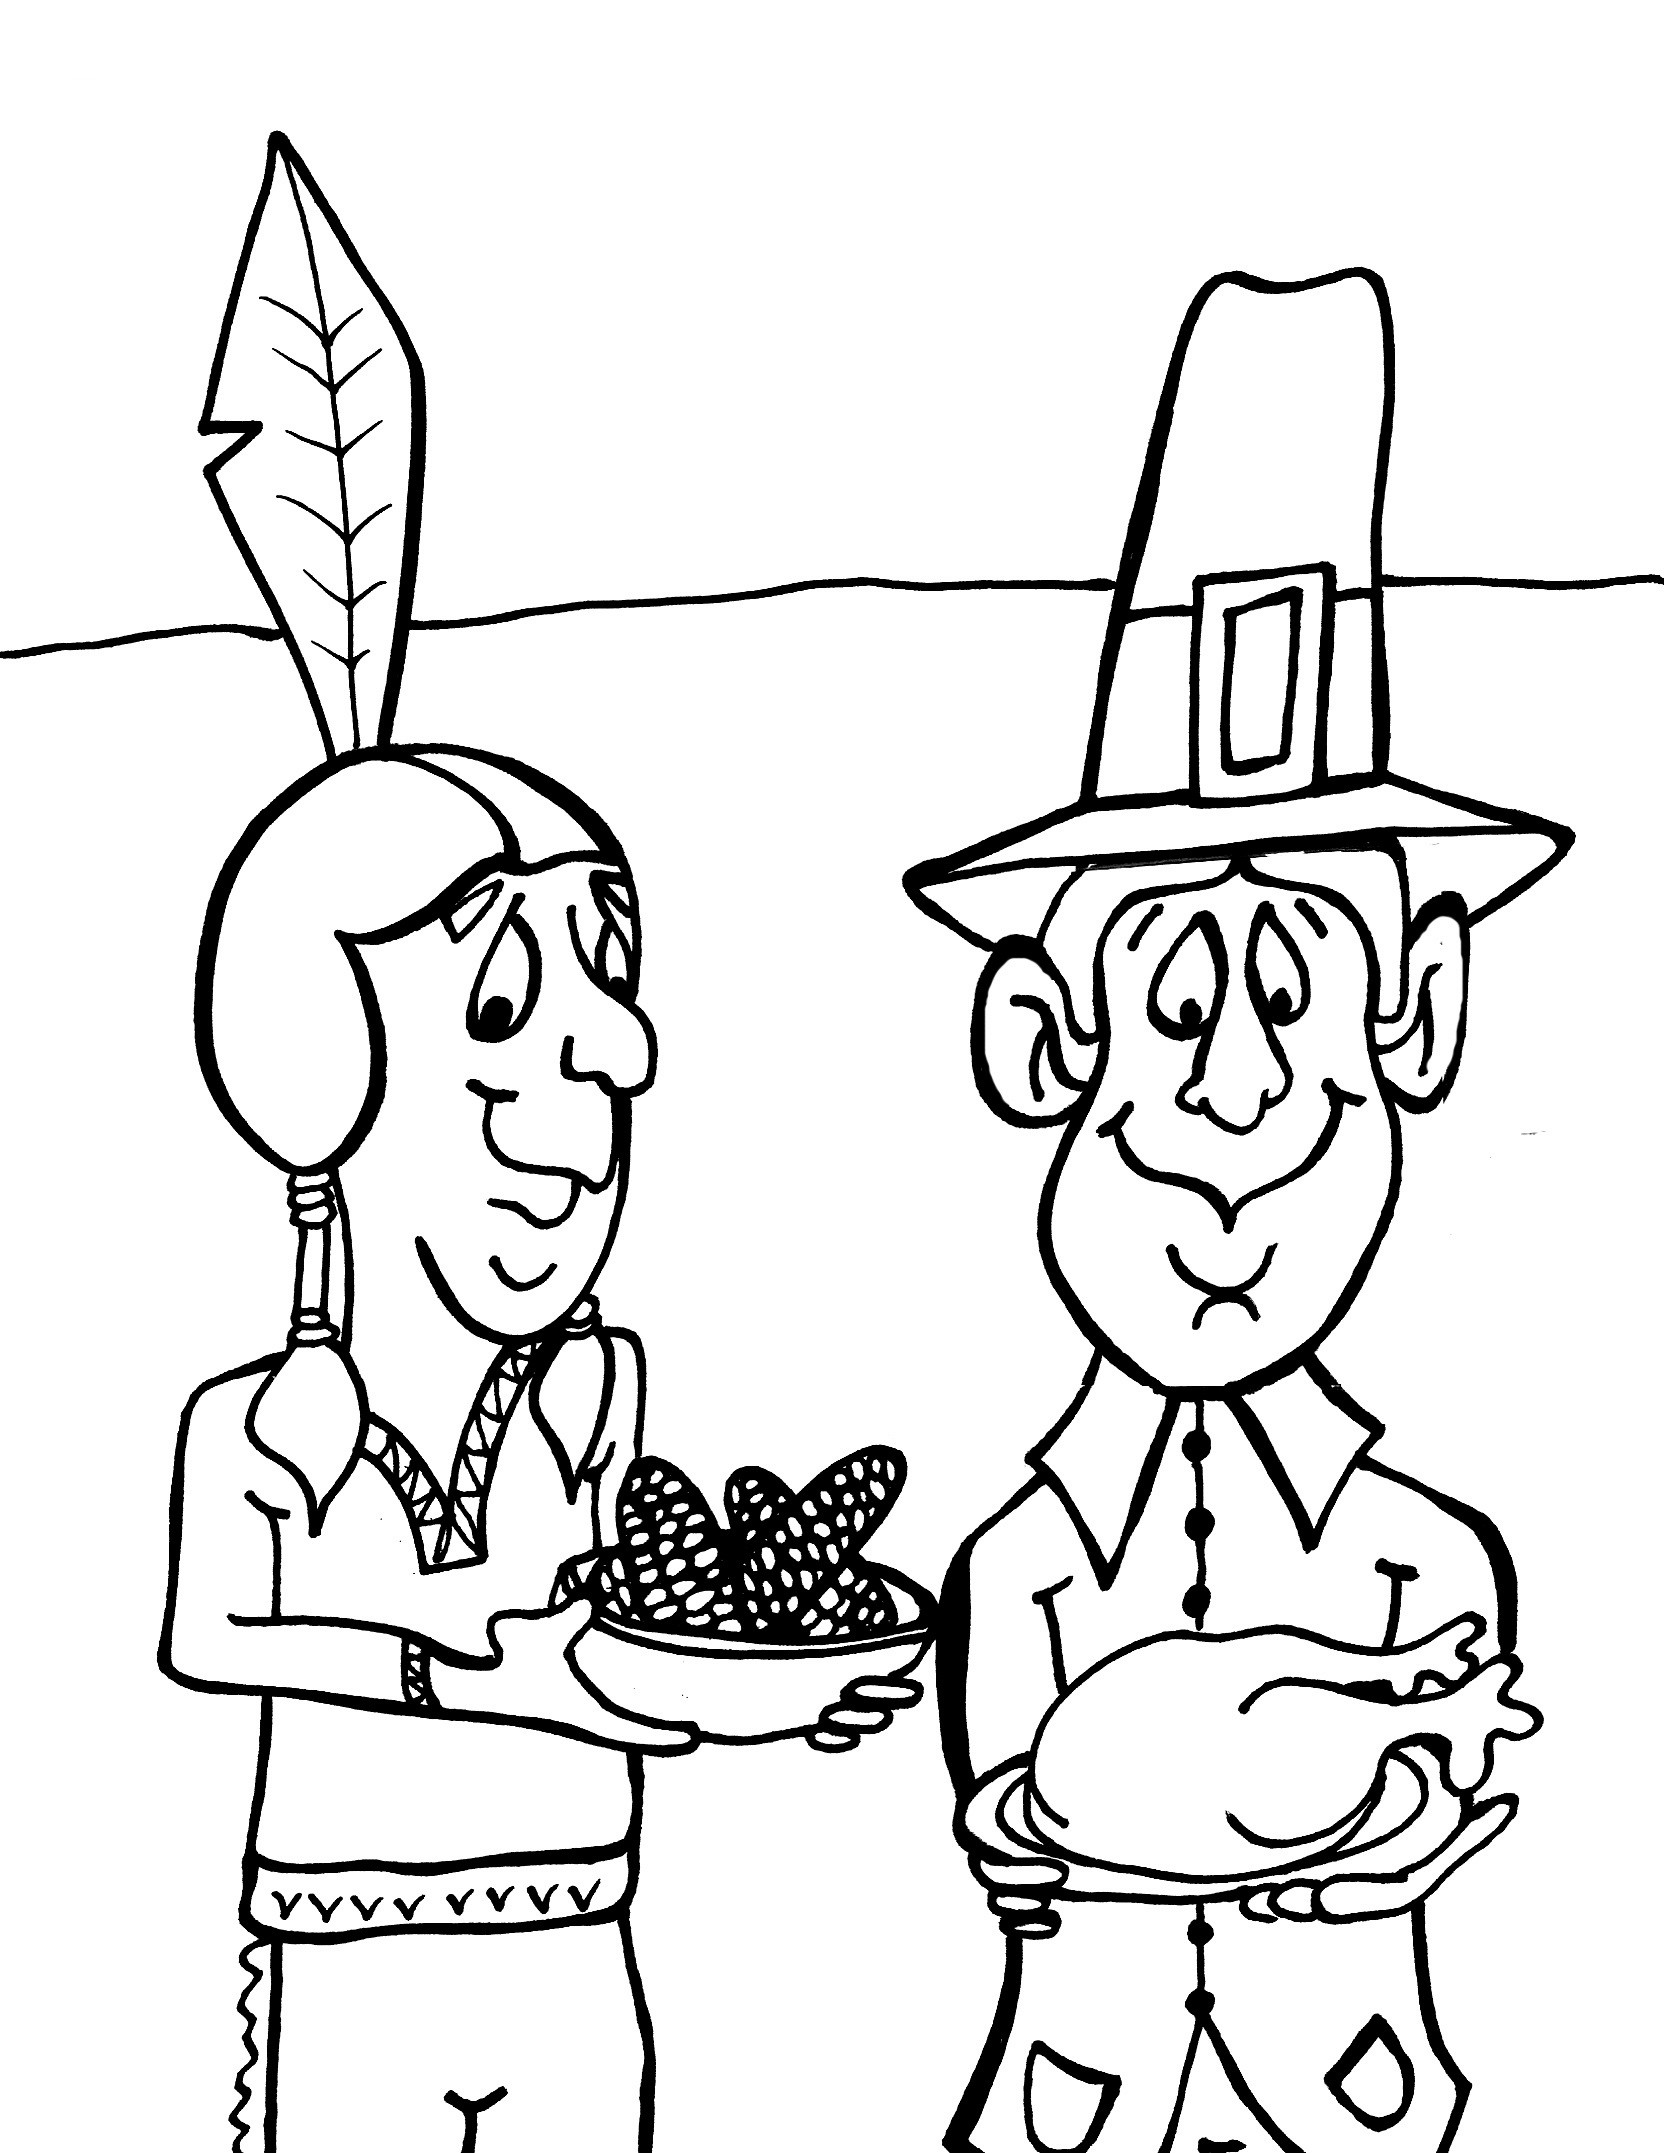 Thanksgiving Coloring Pages For Kids
 Free Printable Thanksgiving Coloring Pages For Kids